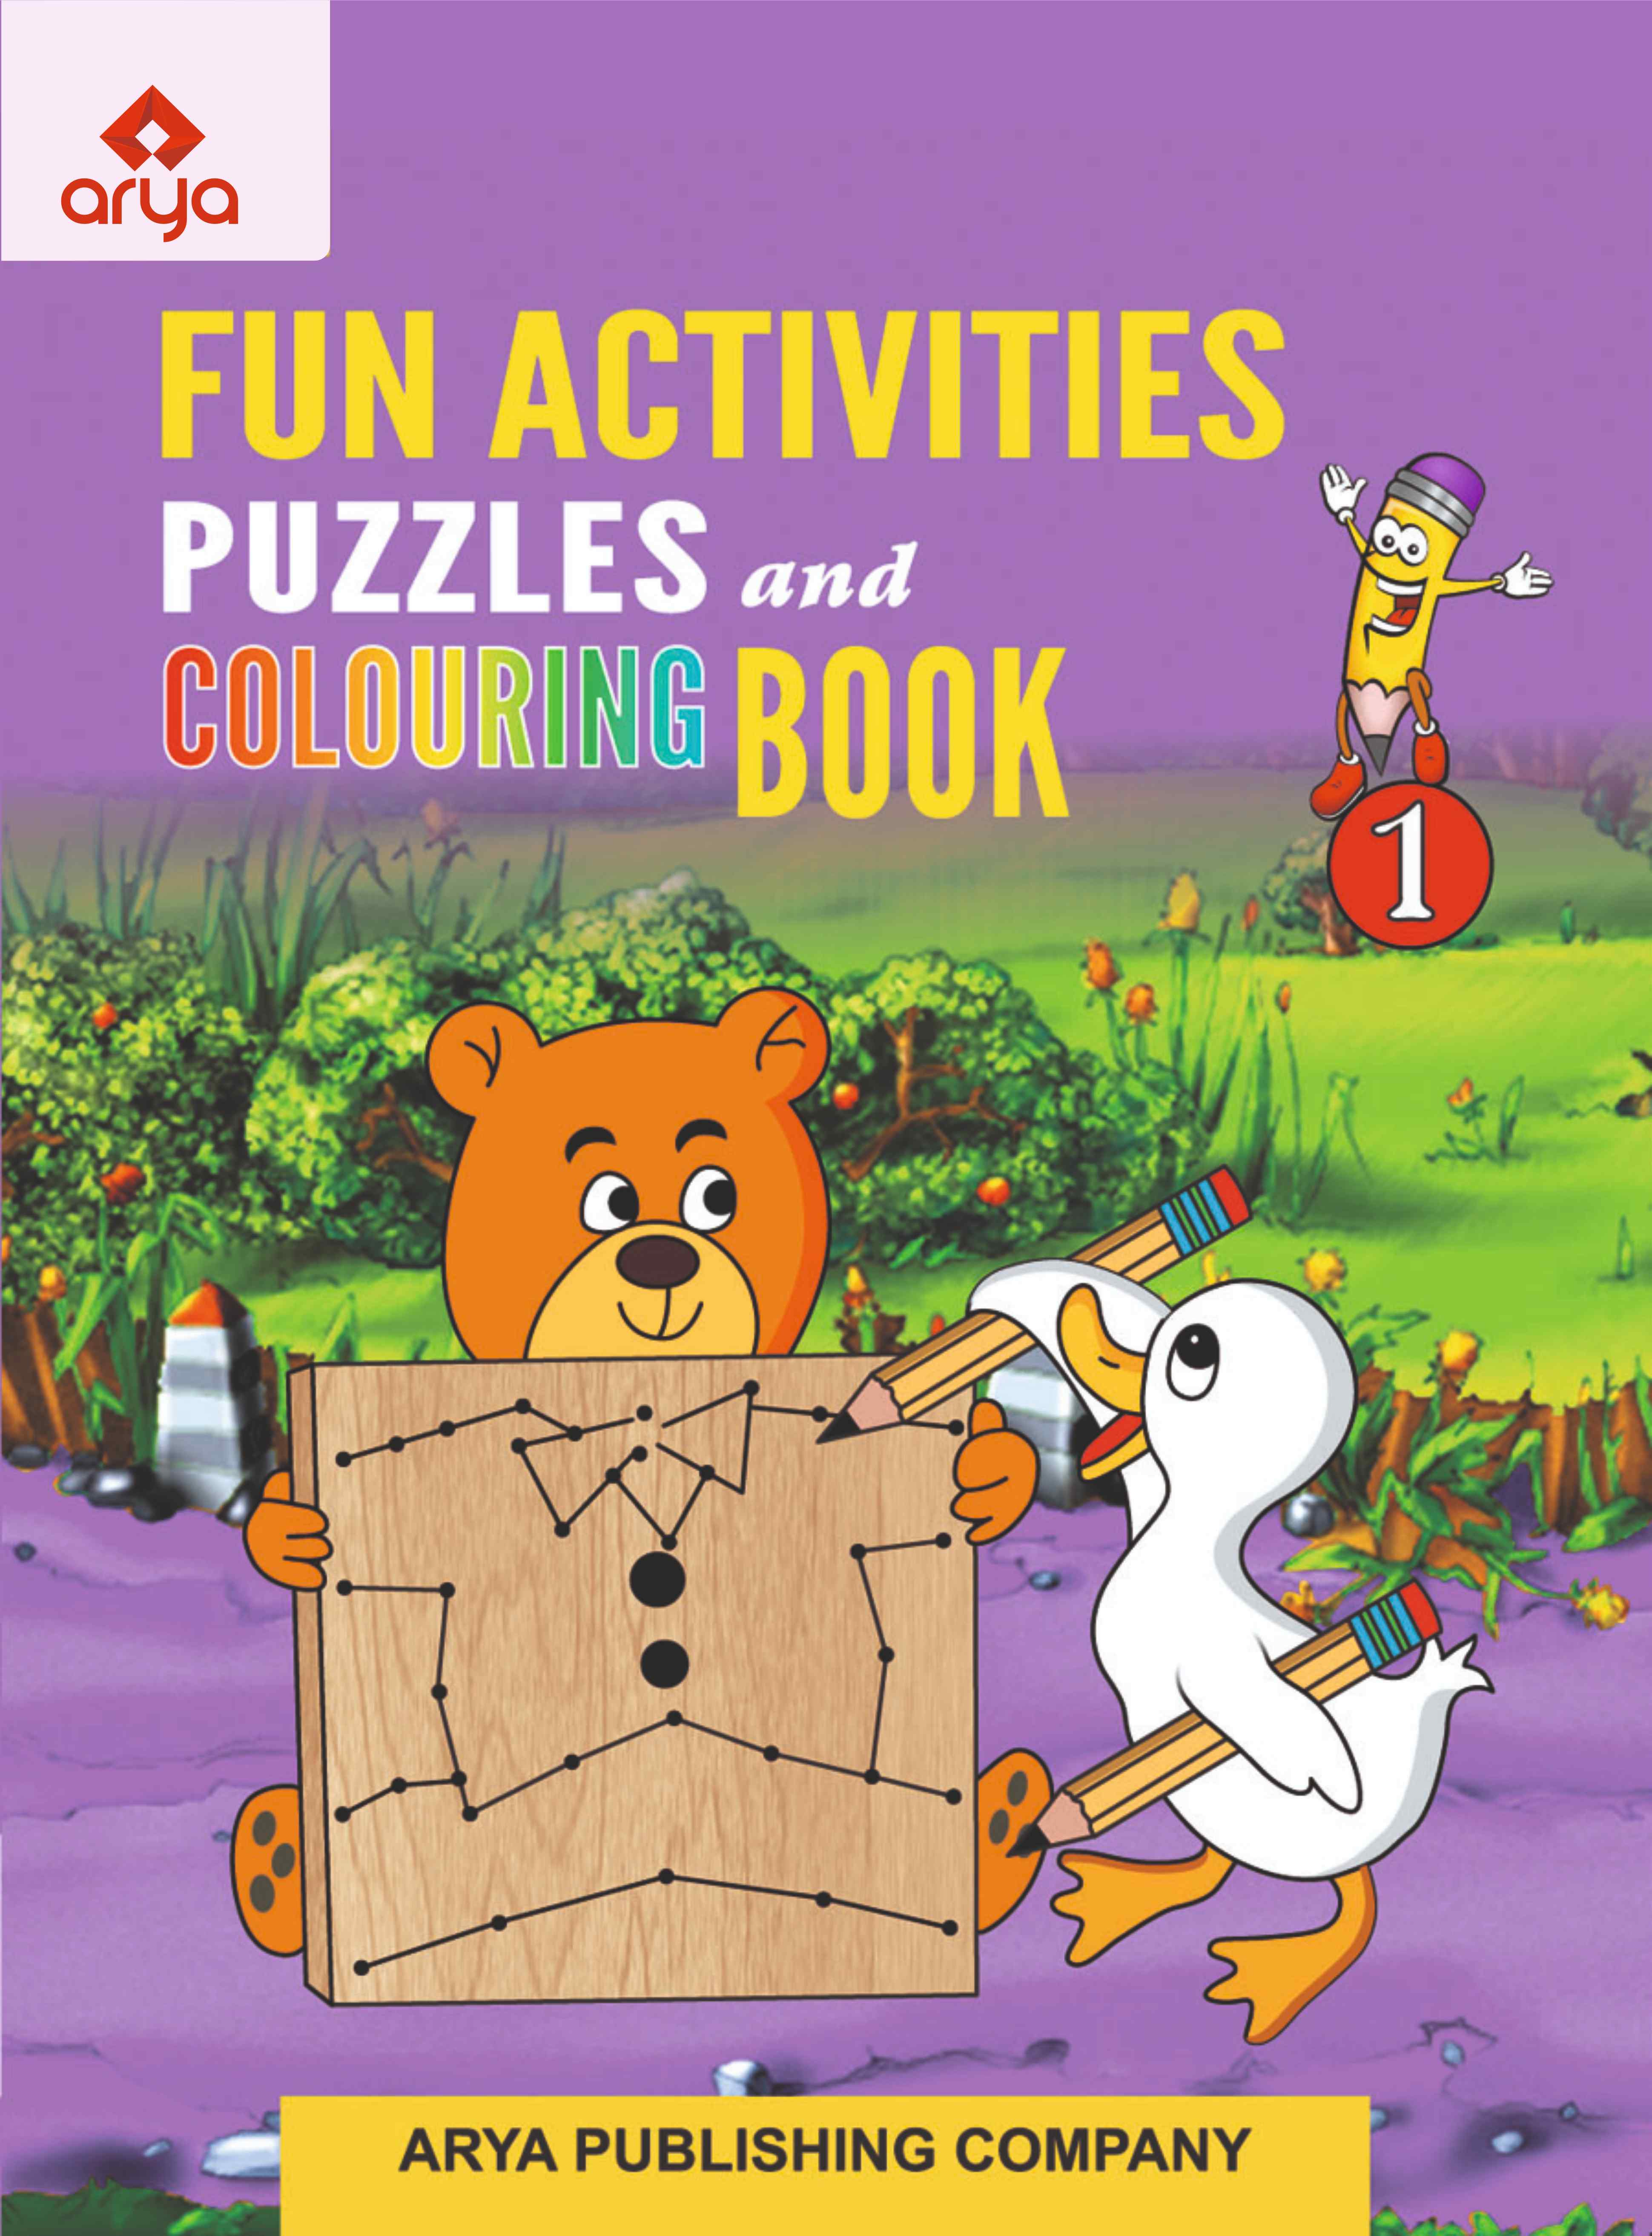 Fun Activities Puzzles and Colouring Book-1